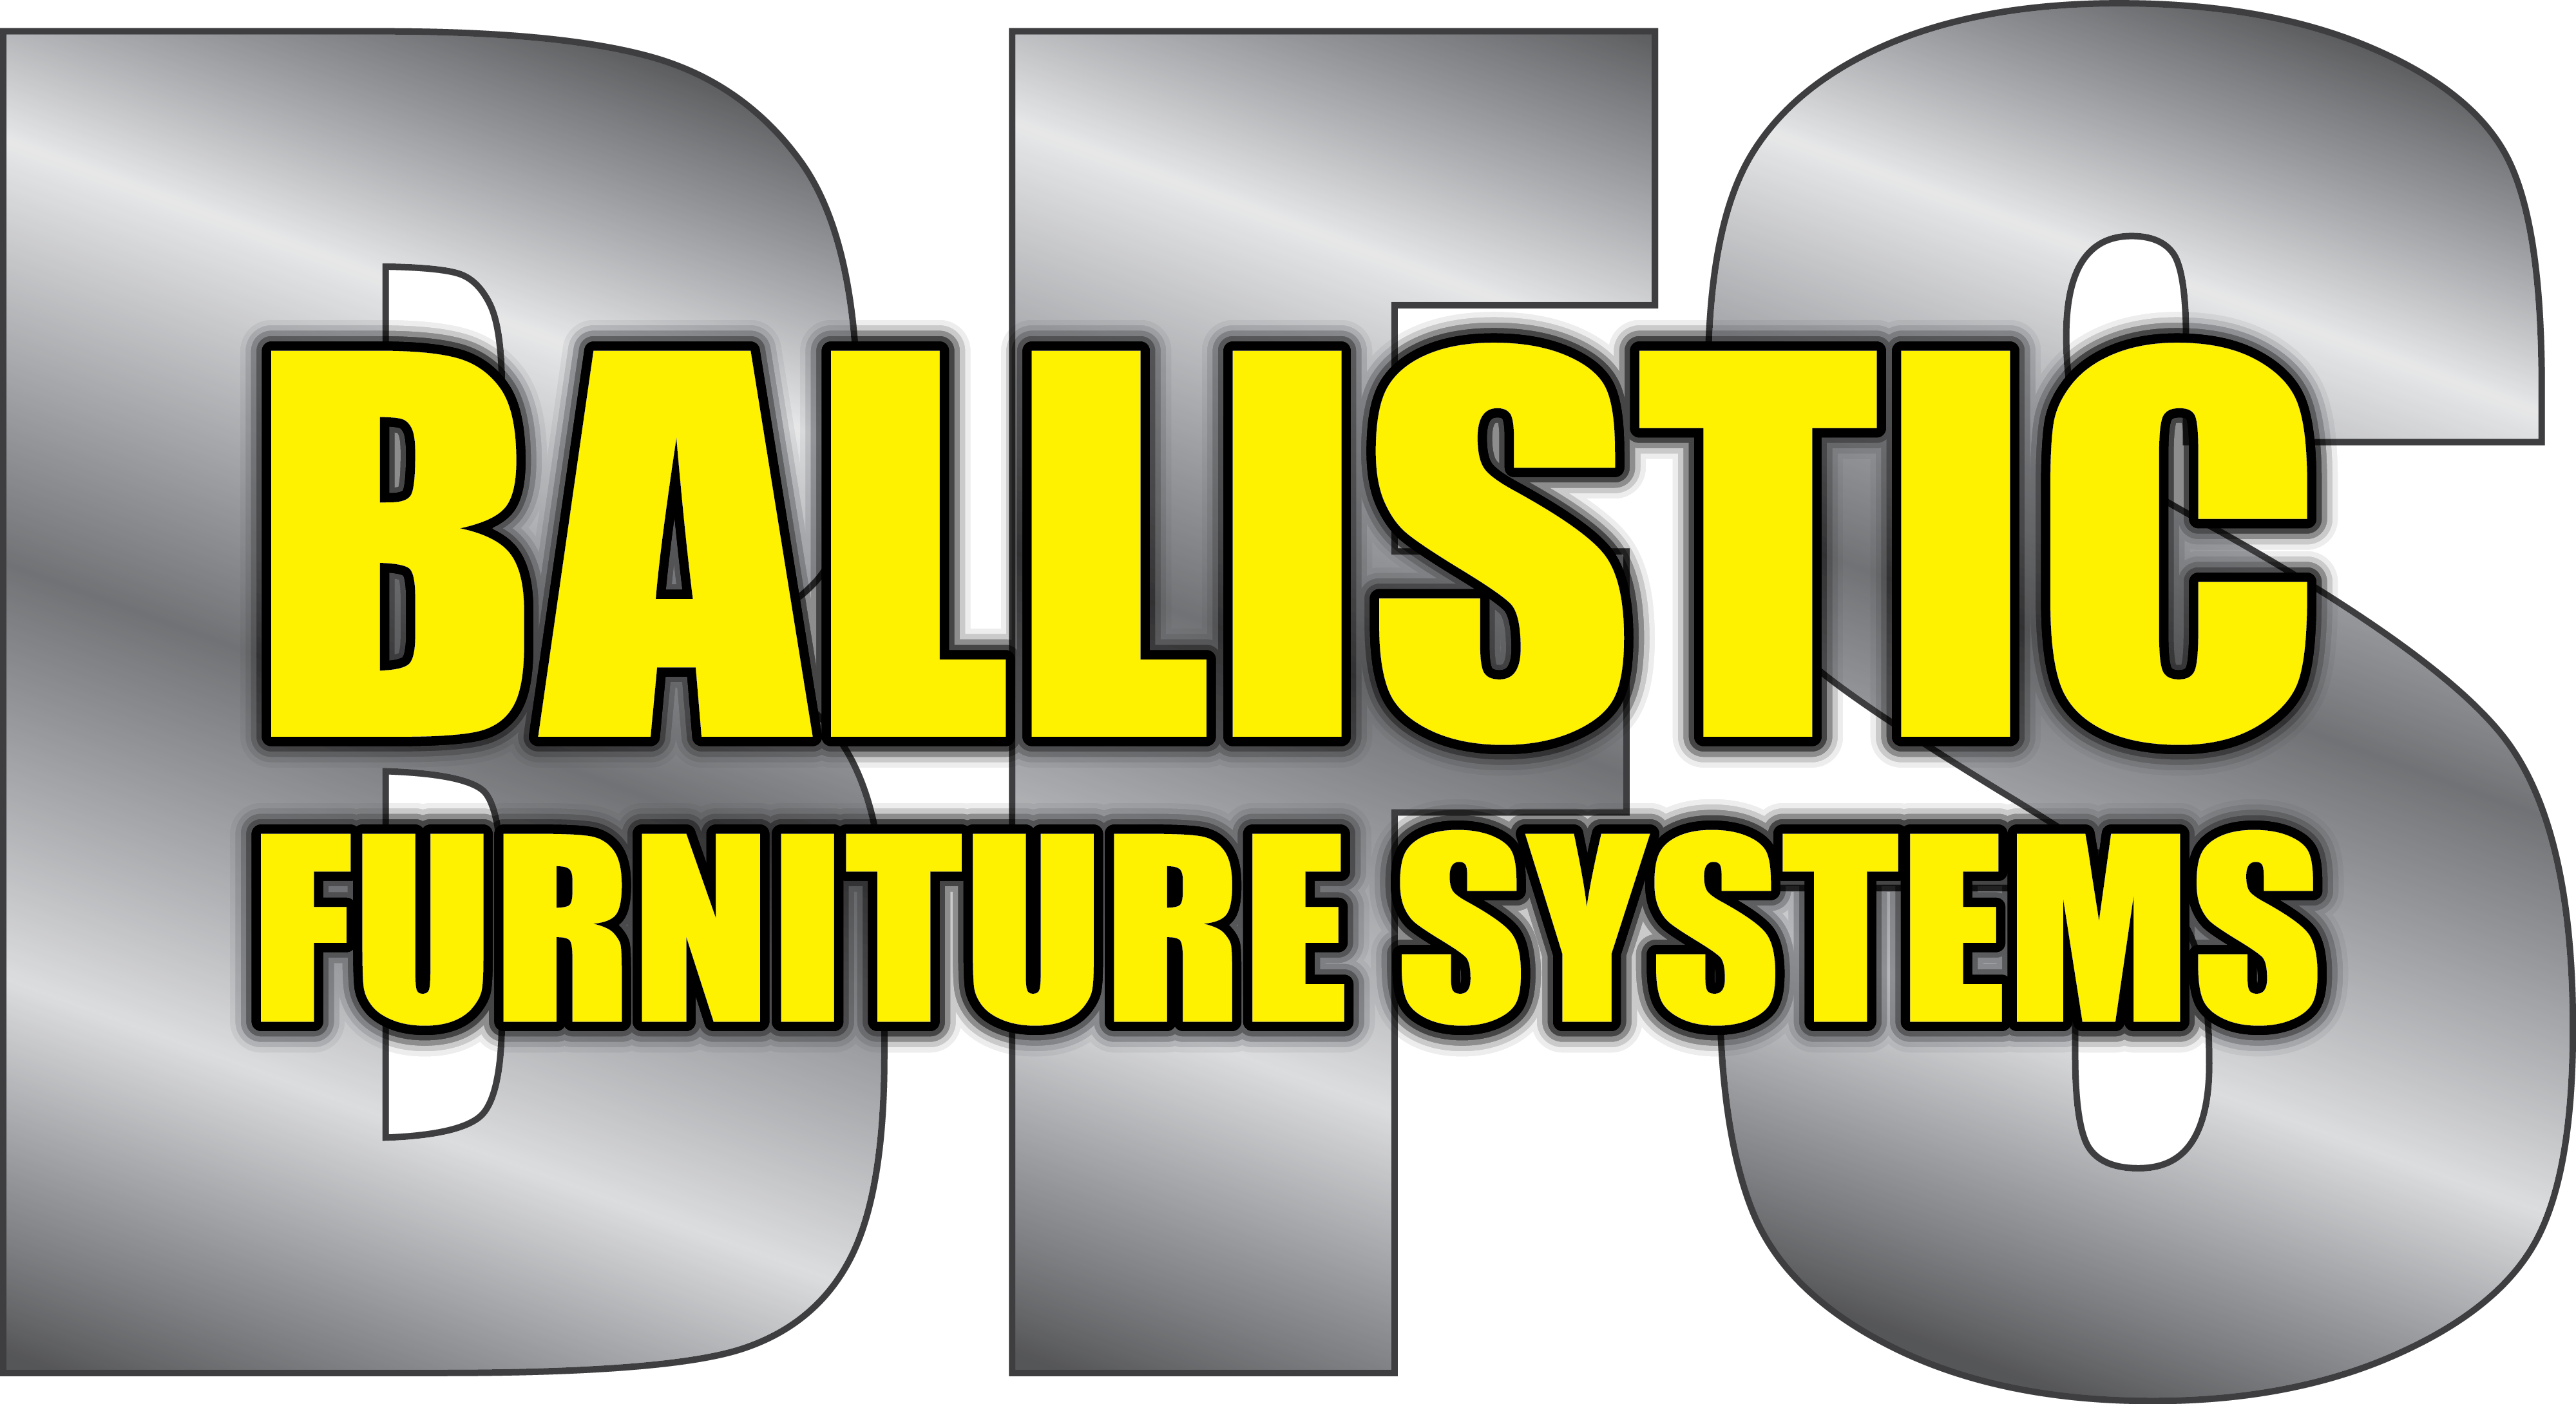 Ballistic Furniture Systems manufactures ballistic barriers for private and public spaces.